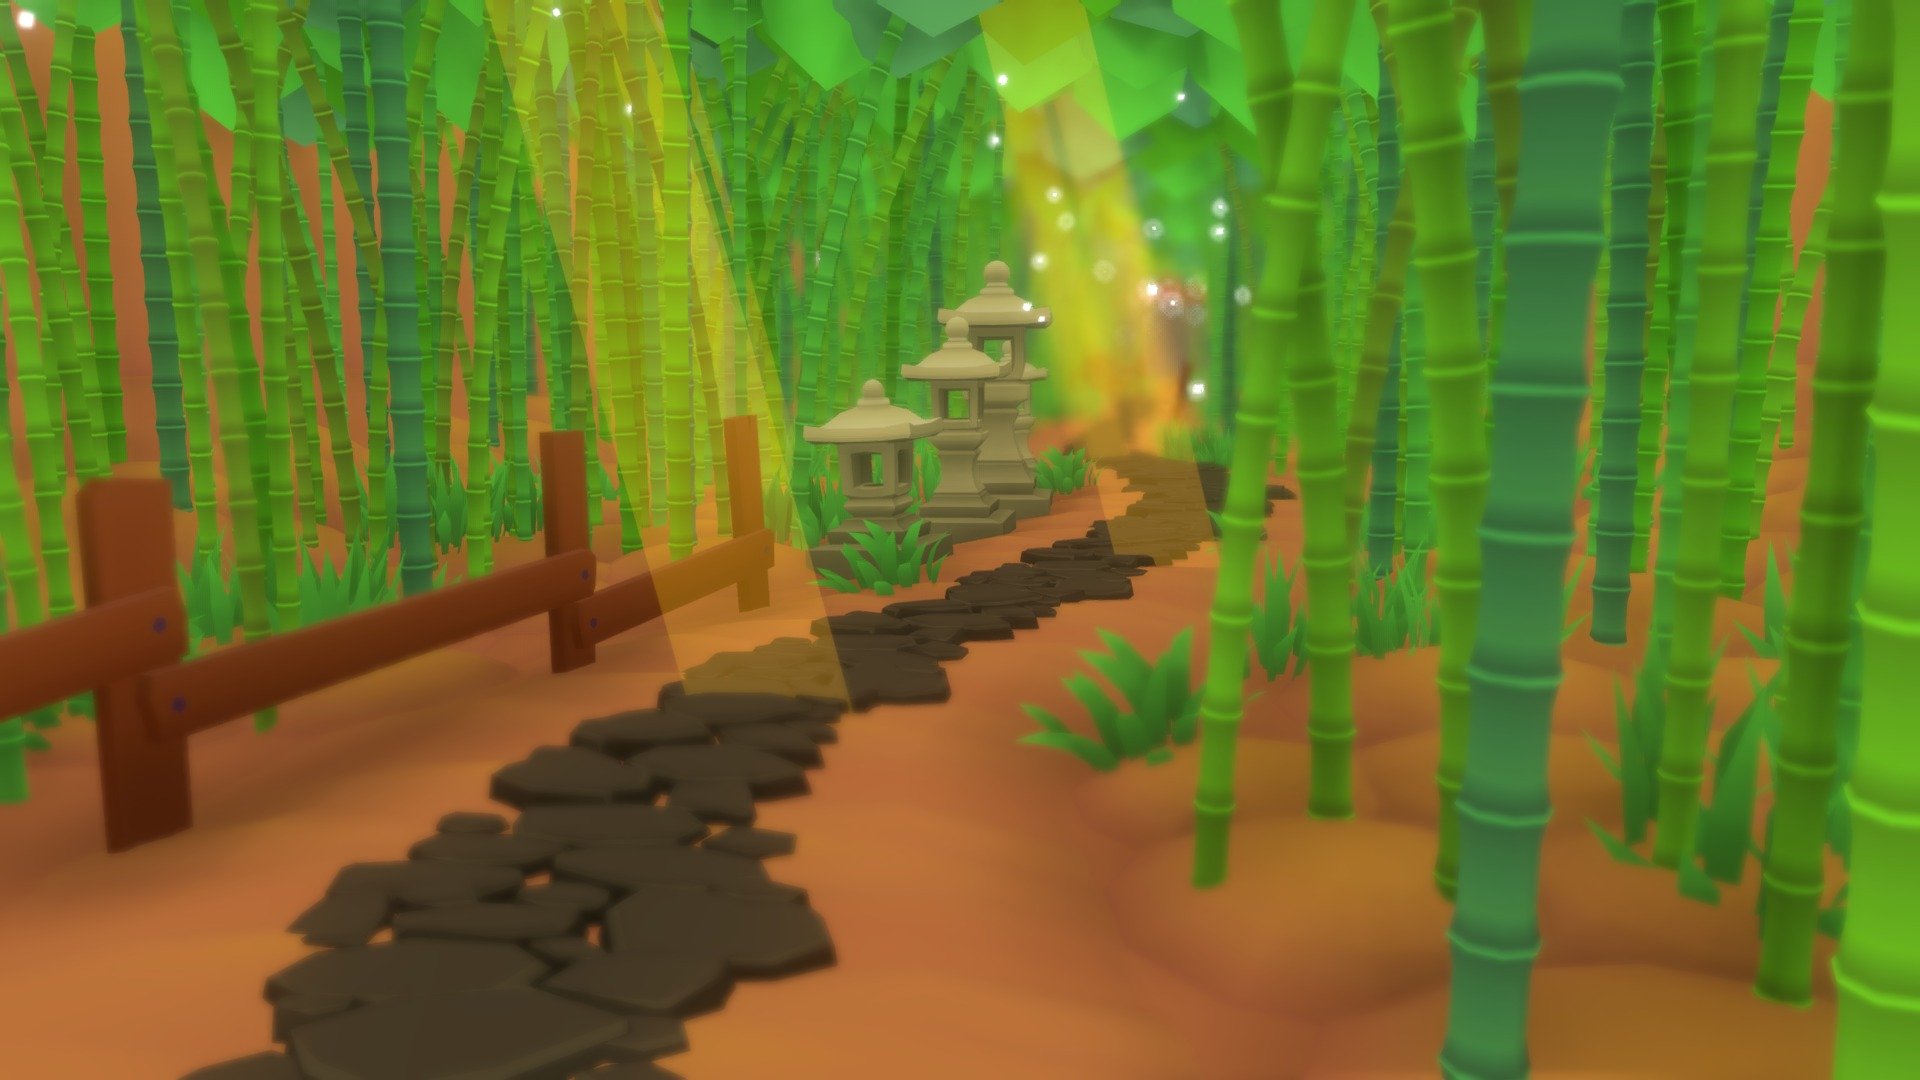 Scene made trying to use mainly Blender Geonodes to distribute the elementes on scene.

Everything is lowpoly and use a single texture with gradients.

The original is here https://www.behance.net/gallery/134393961/Bamboo-Forest-Loop?

the single pieces are here https://sketchfab.com/3d-models/bamboo-forest-pieces-c15a514bb26749788cf2f88a08c389db

the original instagram loop is here https://www.instagram.com/p/CT_CcSTFXYe/ - Bamboo Forest - 3D model by Victor Estivador (@VictorEstivador) 3d model